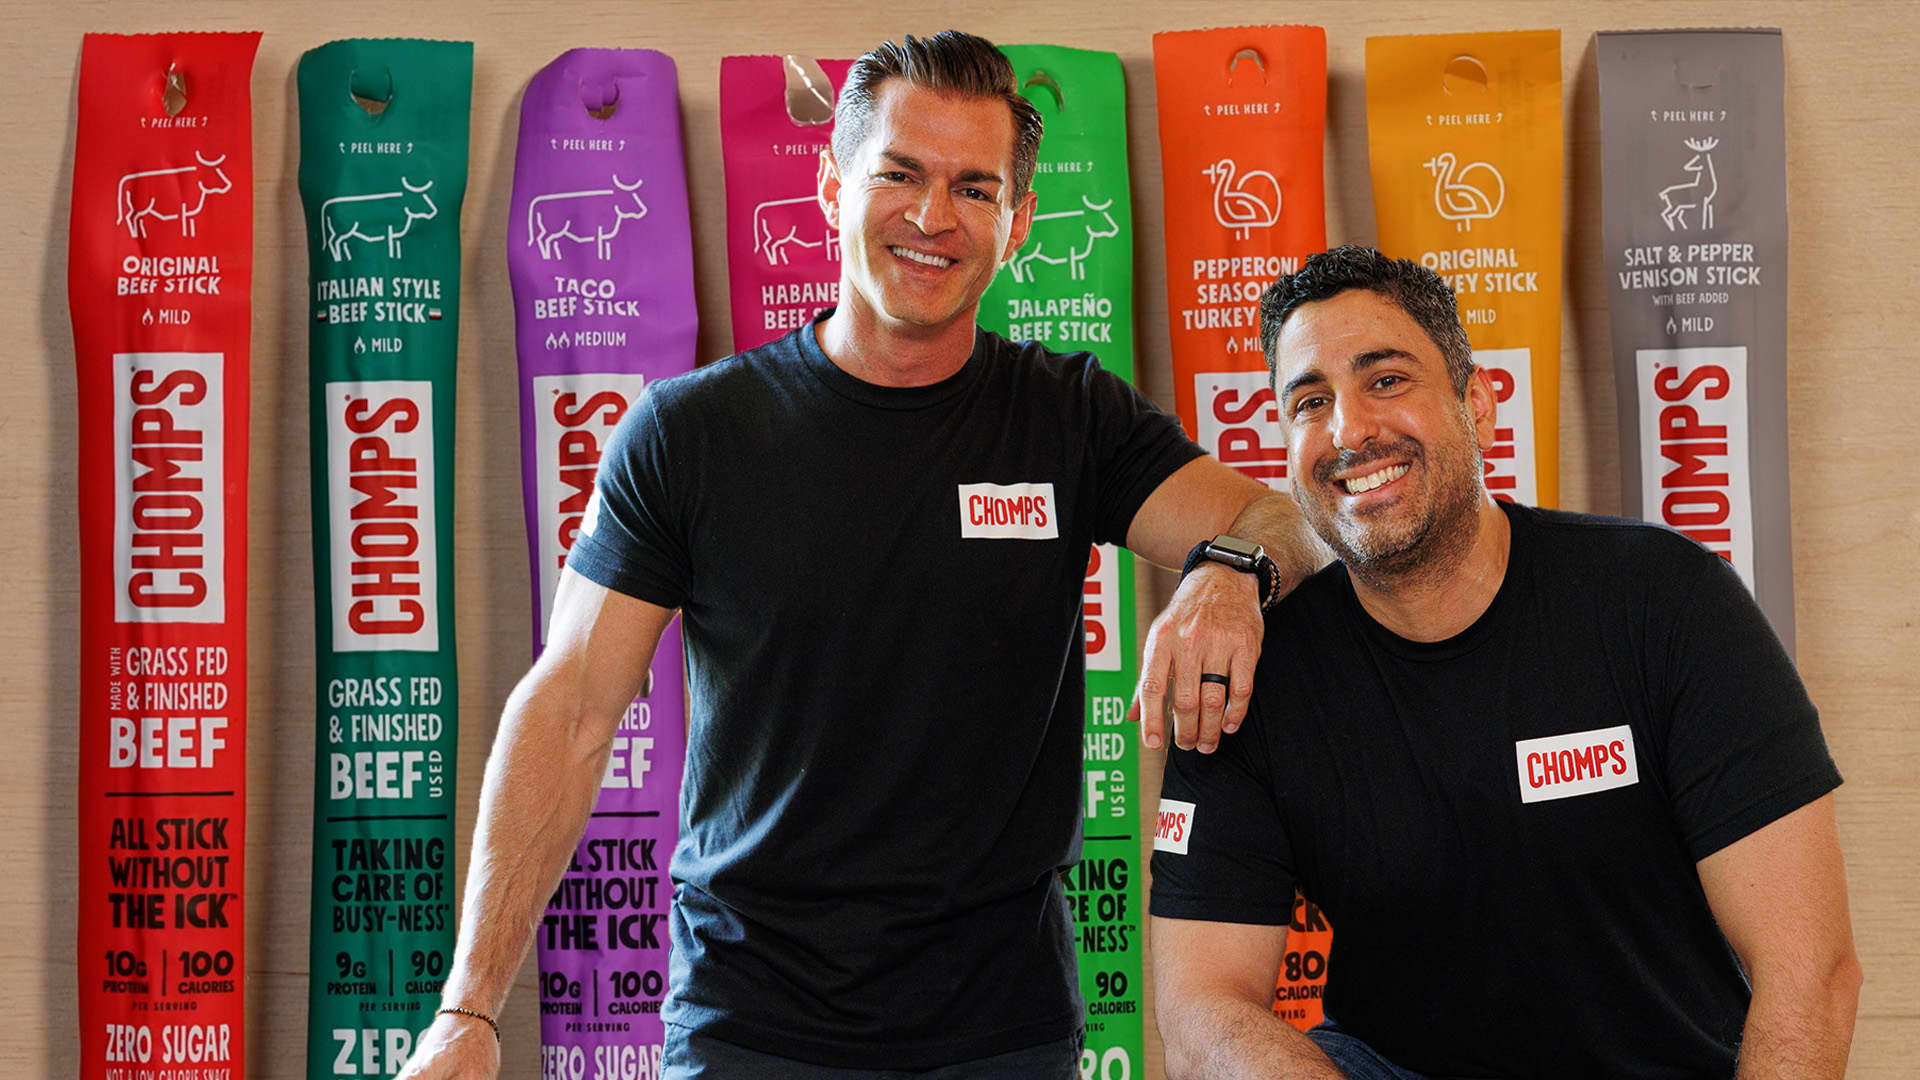 Two friends turned their side hustle into a full-time snack business—it could bring in $500 million